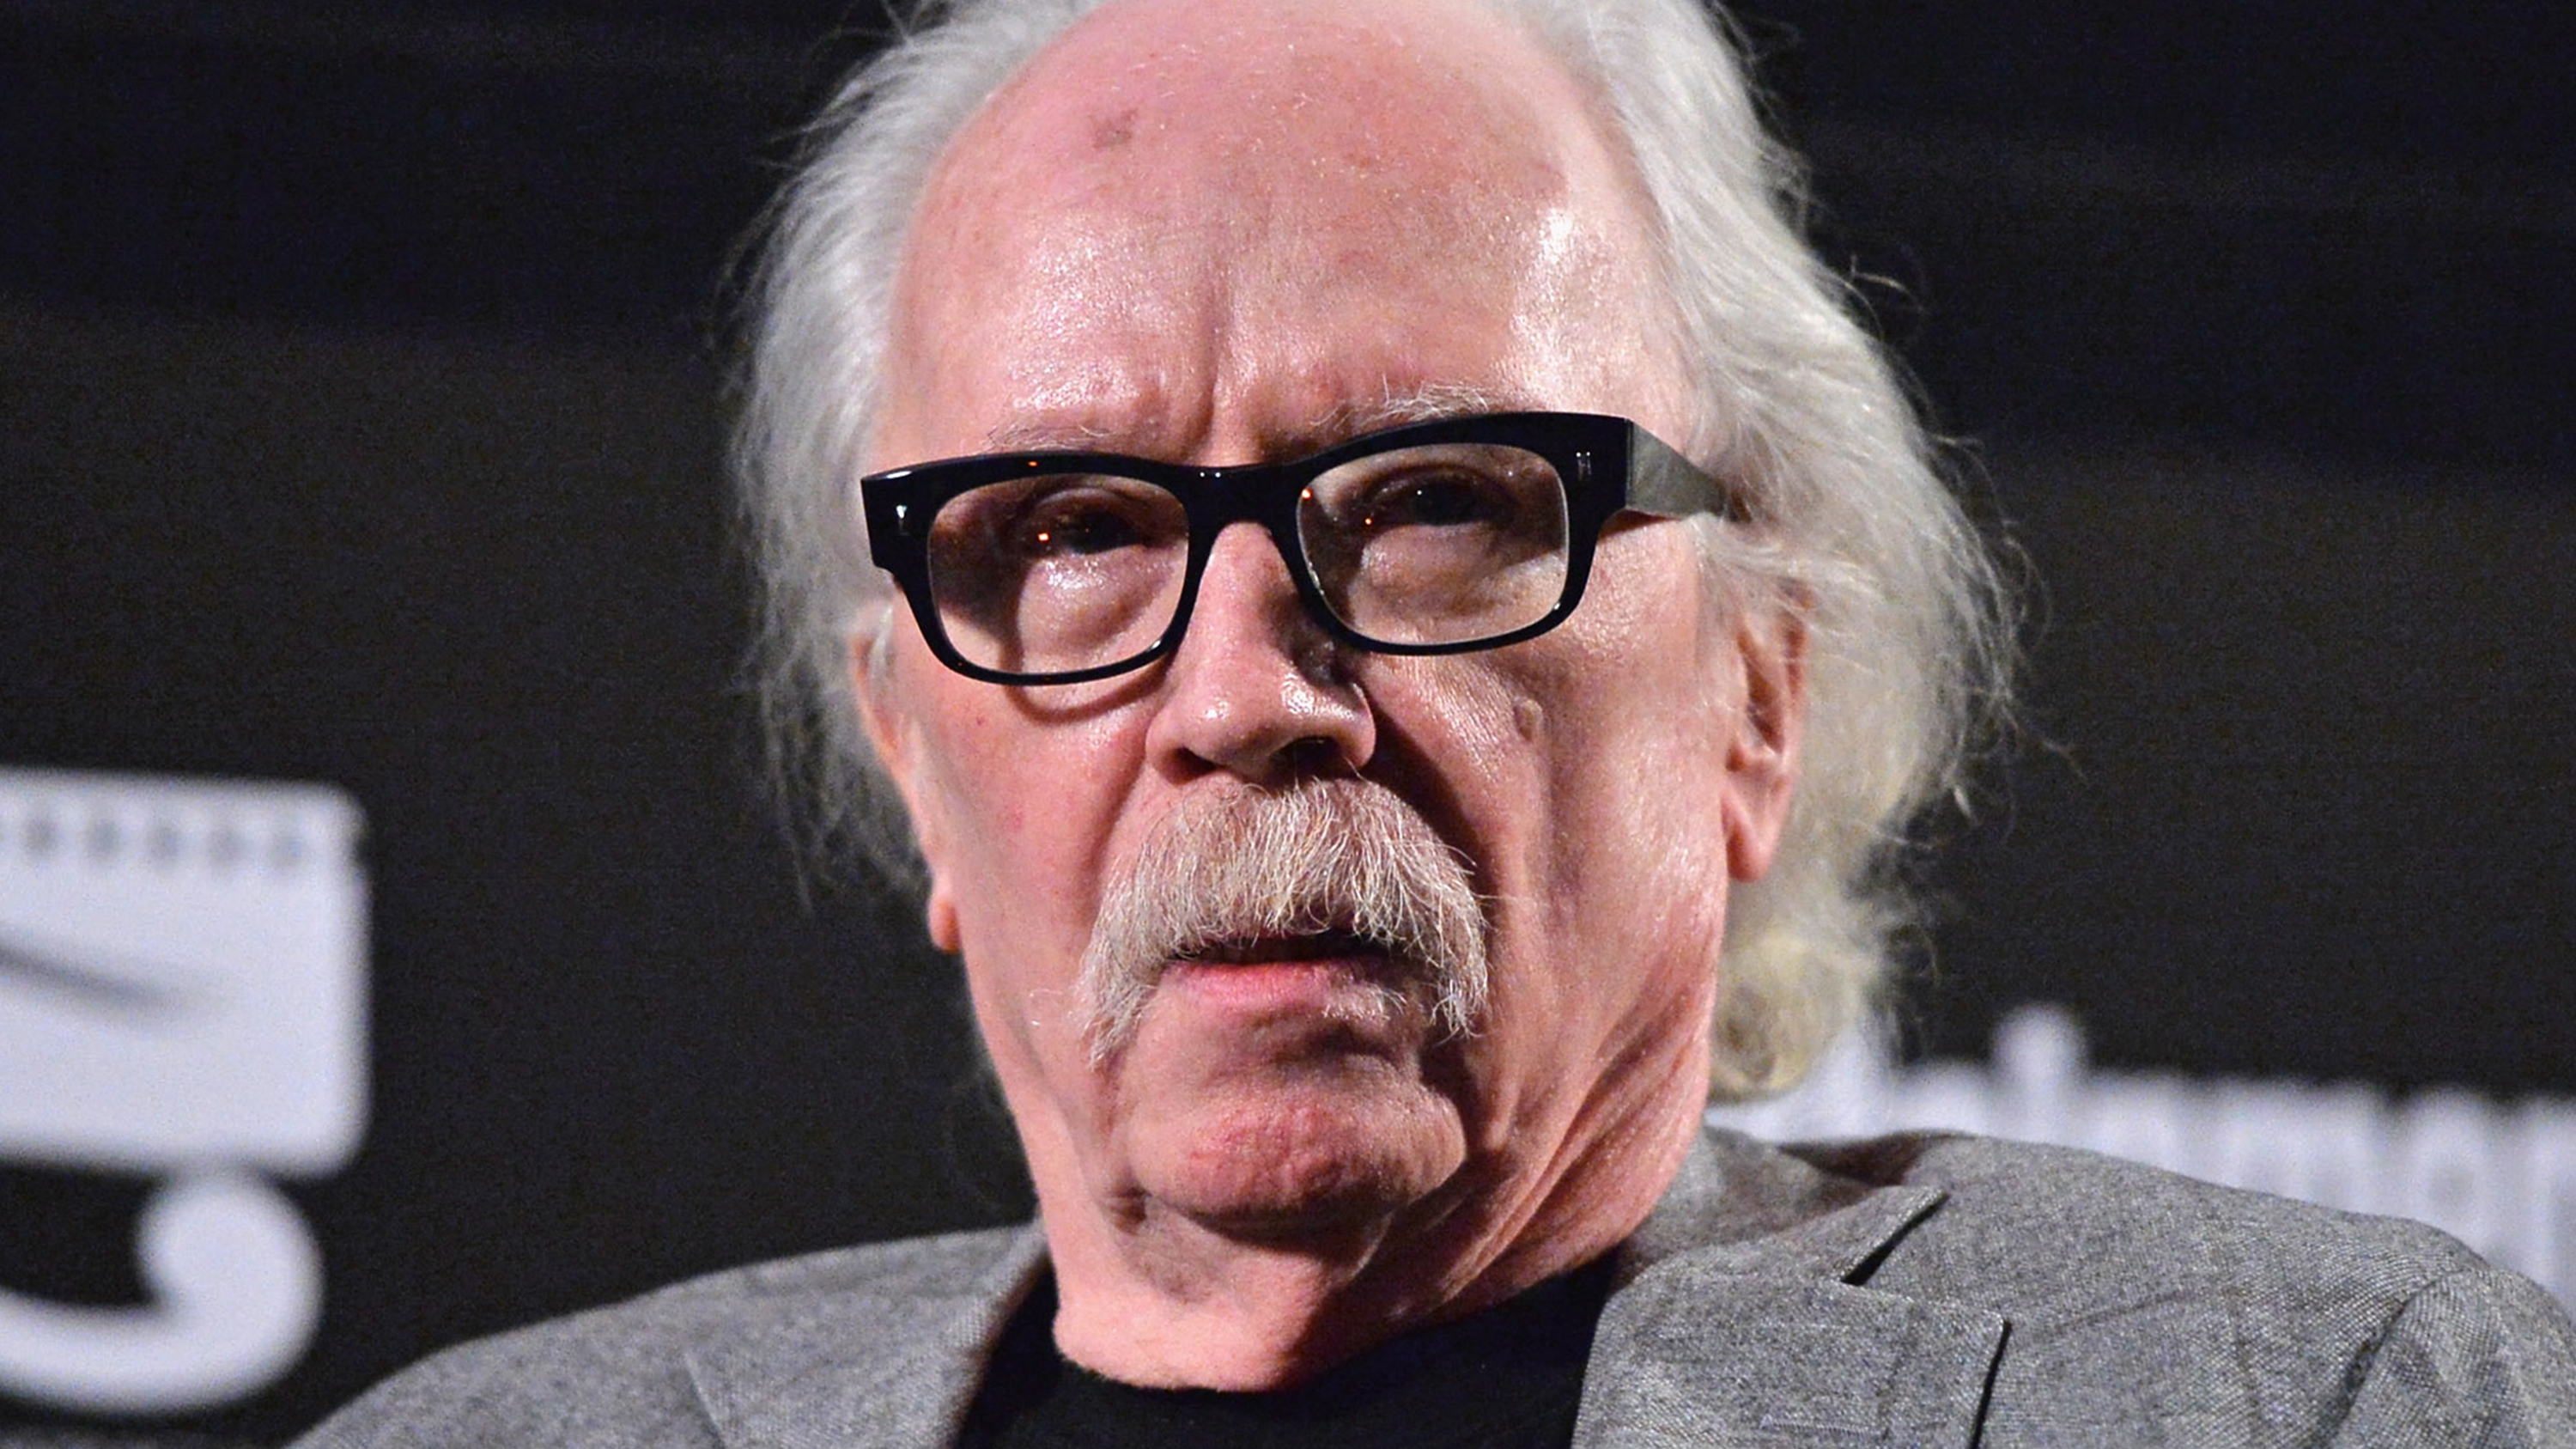 John Carpenter Just Wants to Play Video Games and Watch Basketball